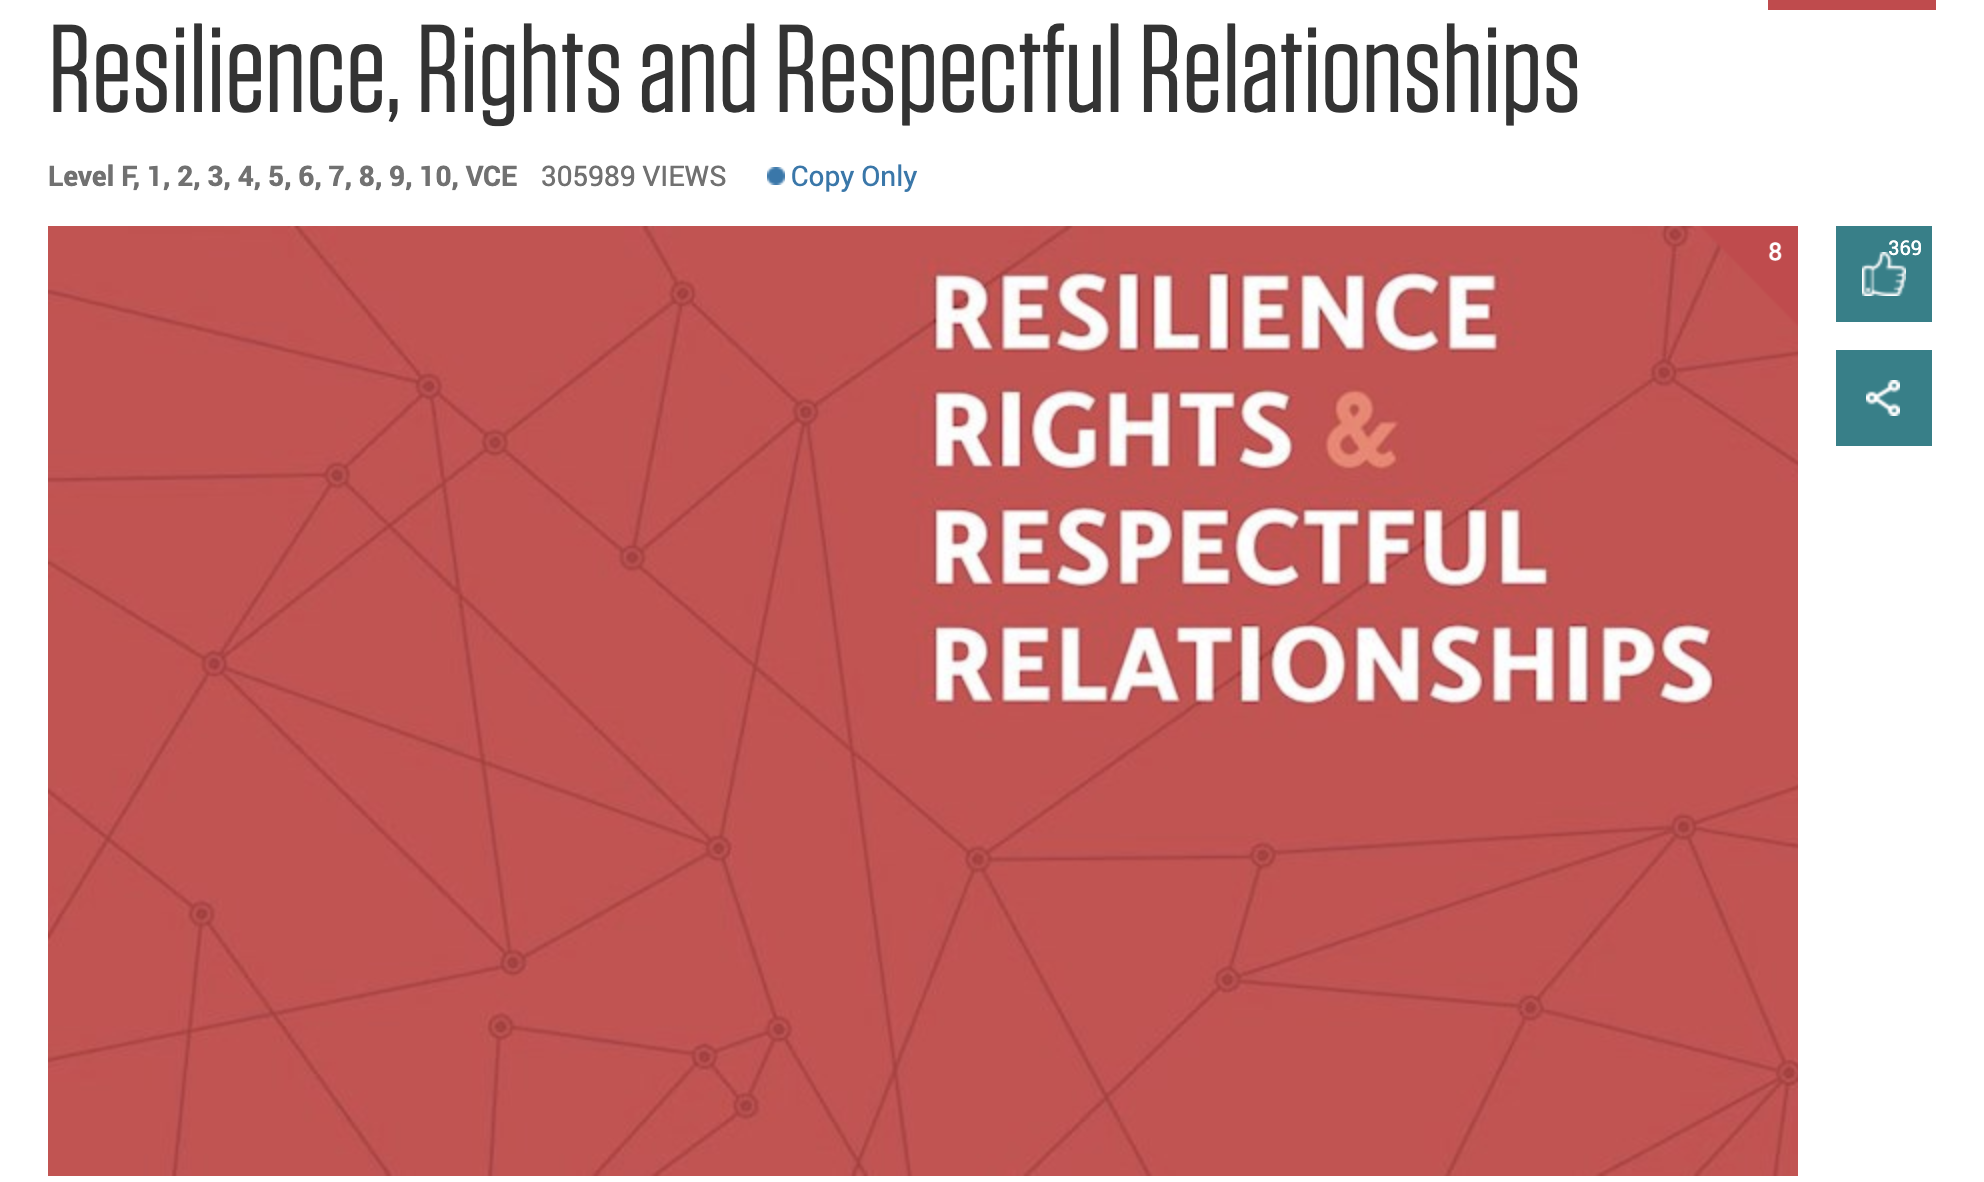 Resilience Rights and Respectful Relationships